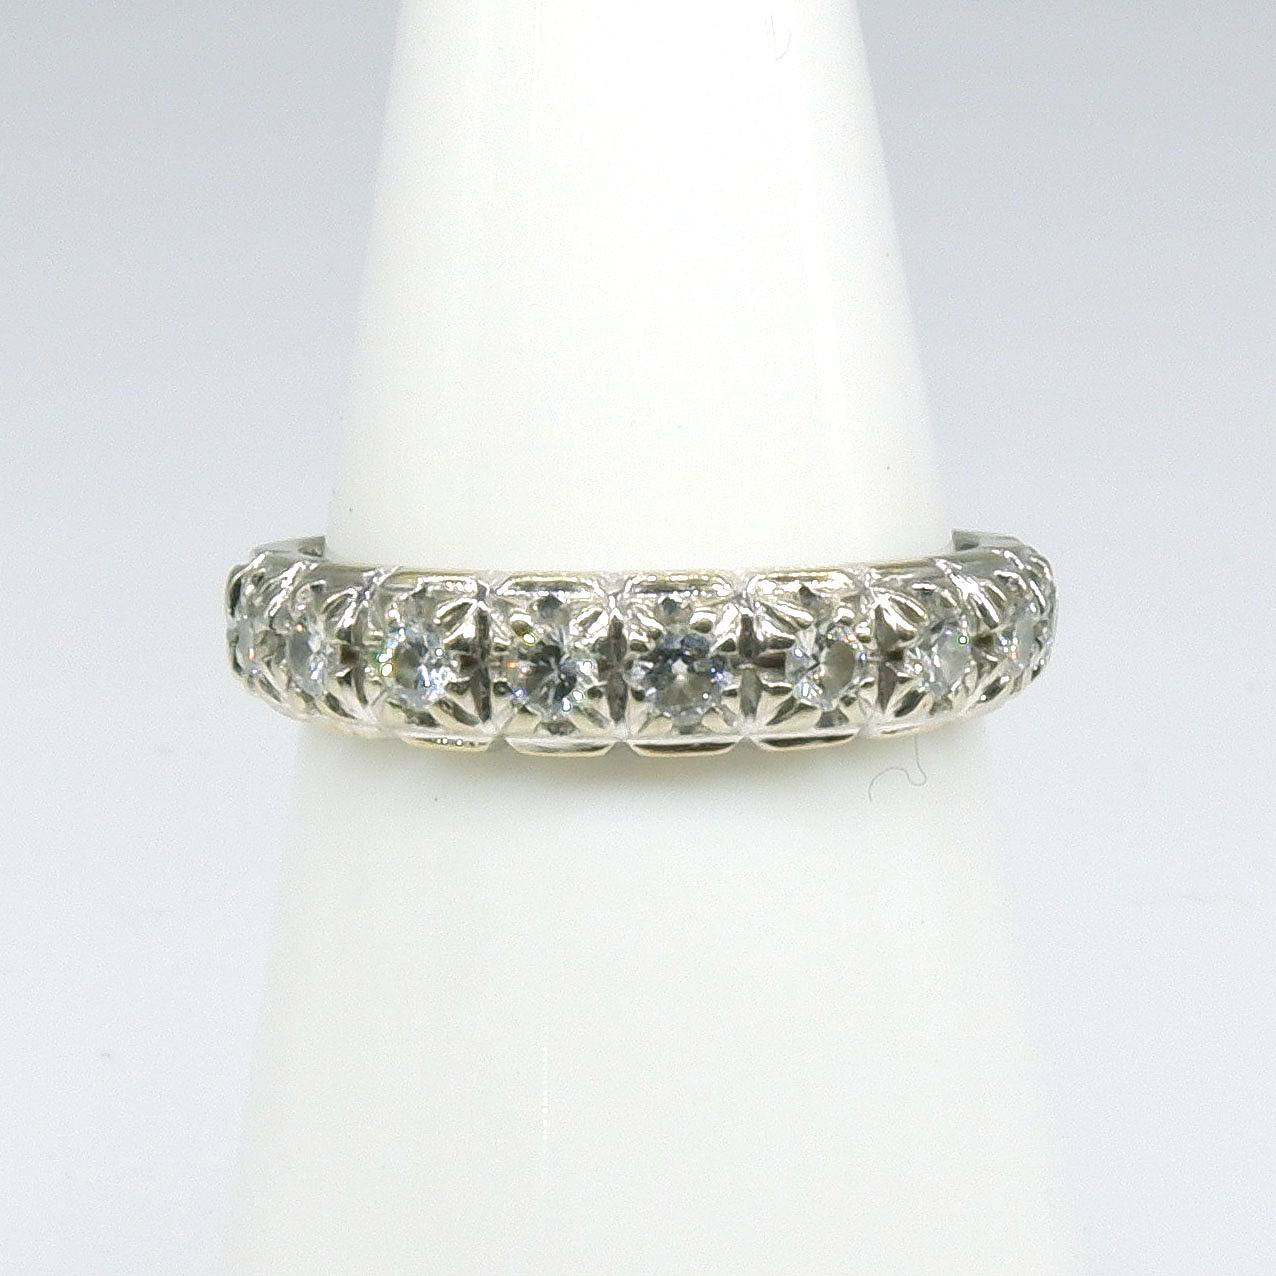 '18ct White Gold Eternity Ring With Nine Brilliant Cut Diamonds'